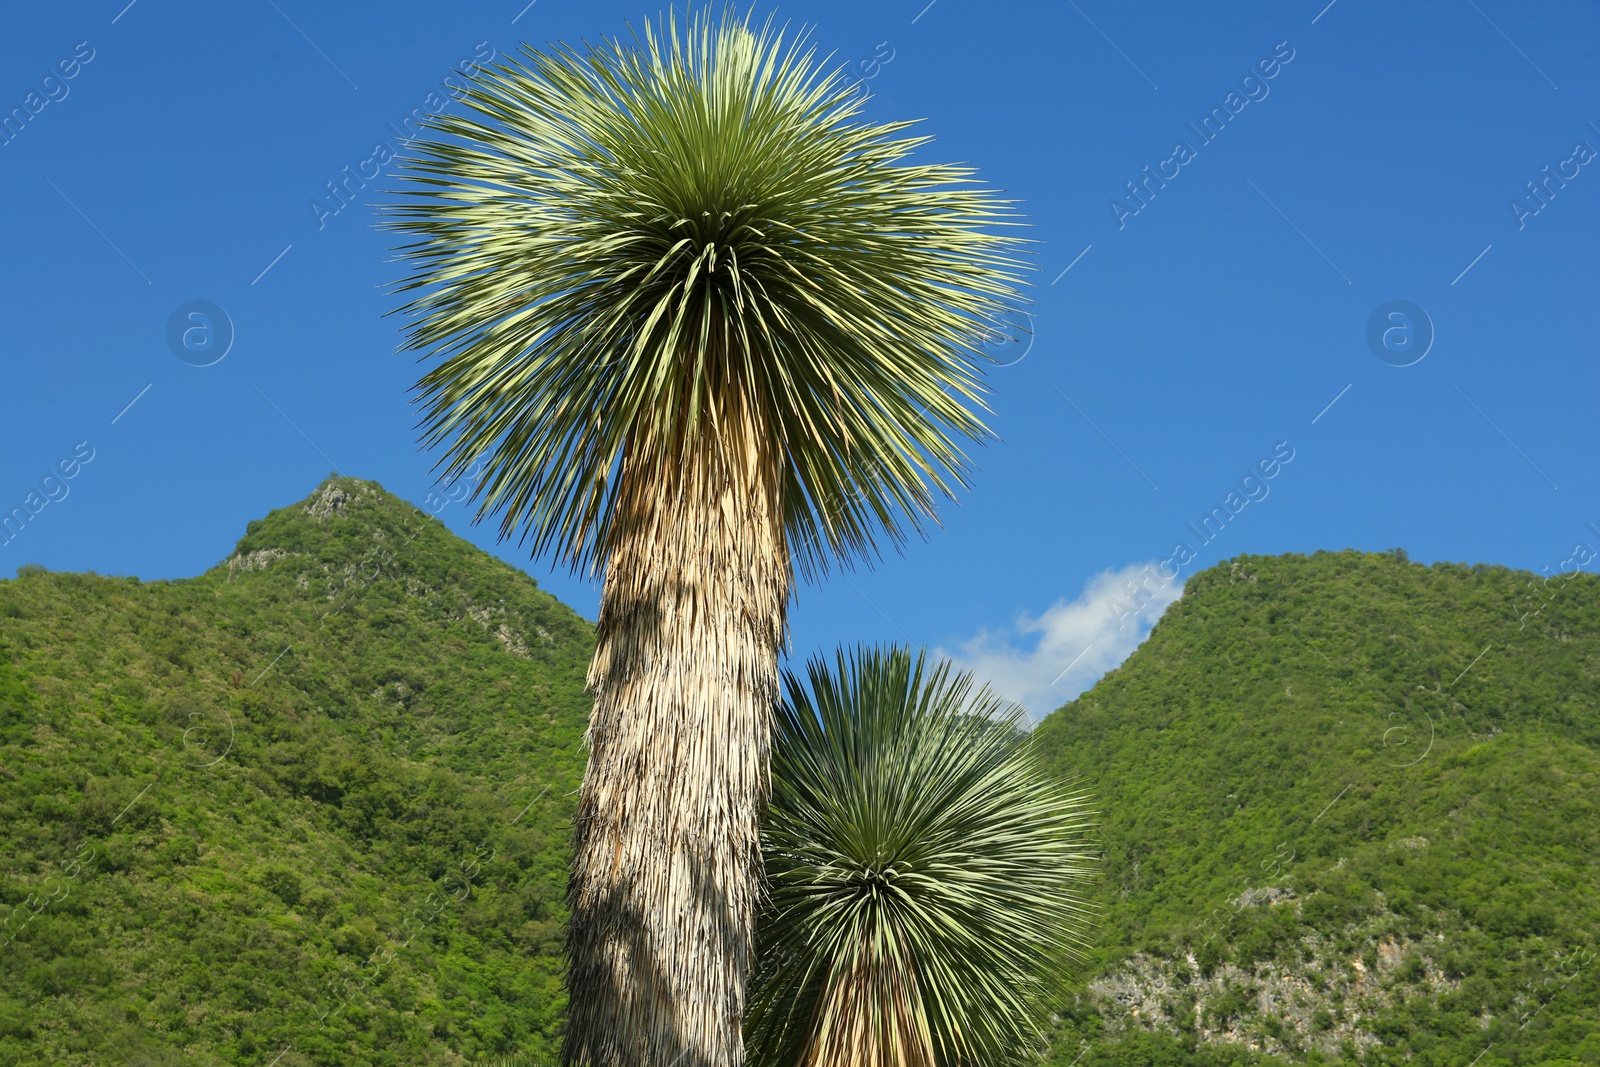 Photo of Beautiful palm trees with green leaves against mountains and blue sky